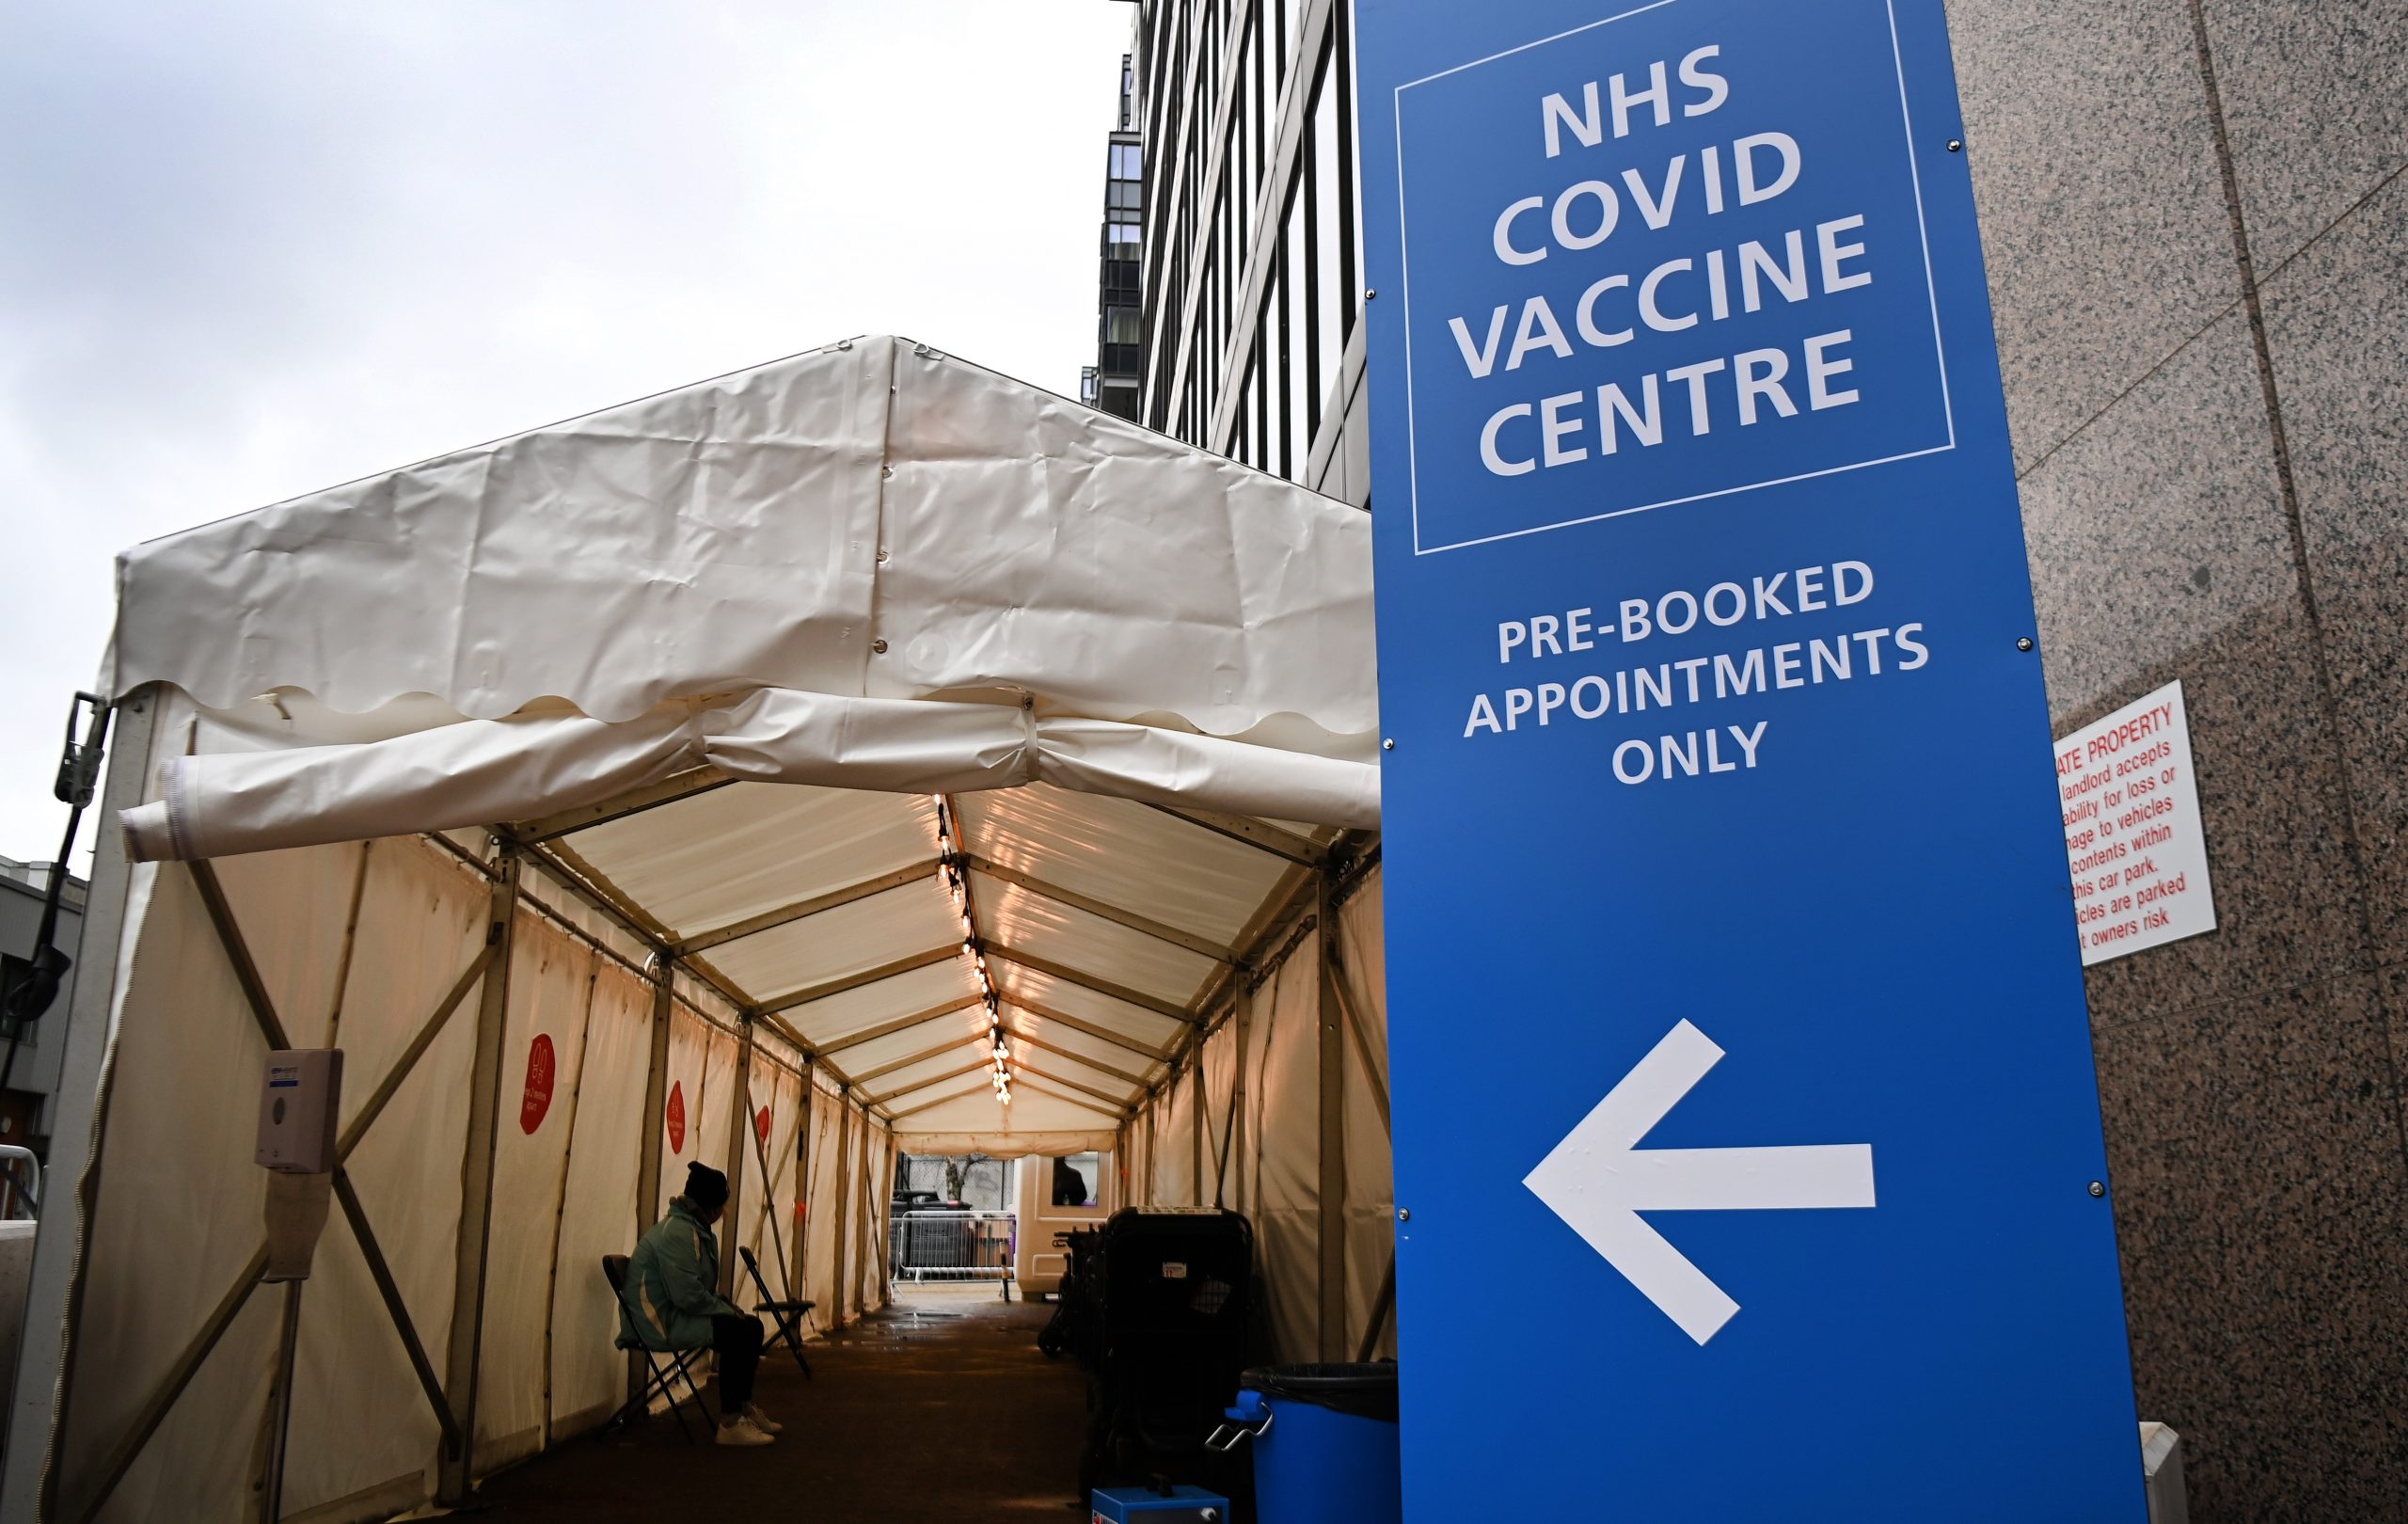 epa08971230 A Covid-19 vaccination centre at Wembley in London, Britain, 28 January 2021. Britain's national health service (NHS) is coming under severe pressure as Covid-19 hospital admissions are not falling fast enough across the UK. Over one thousand people are dying each day from the disease.  EPA/ANDY RAIN